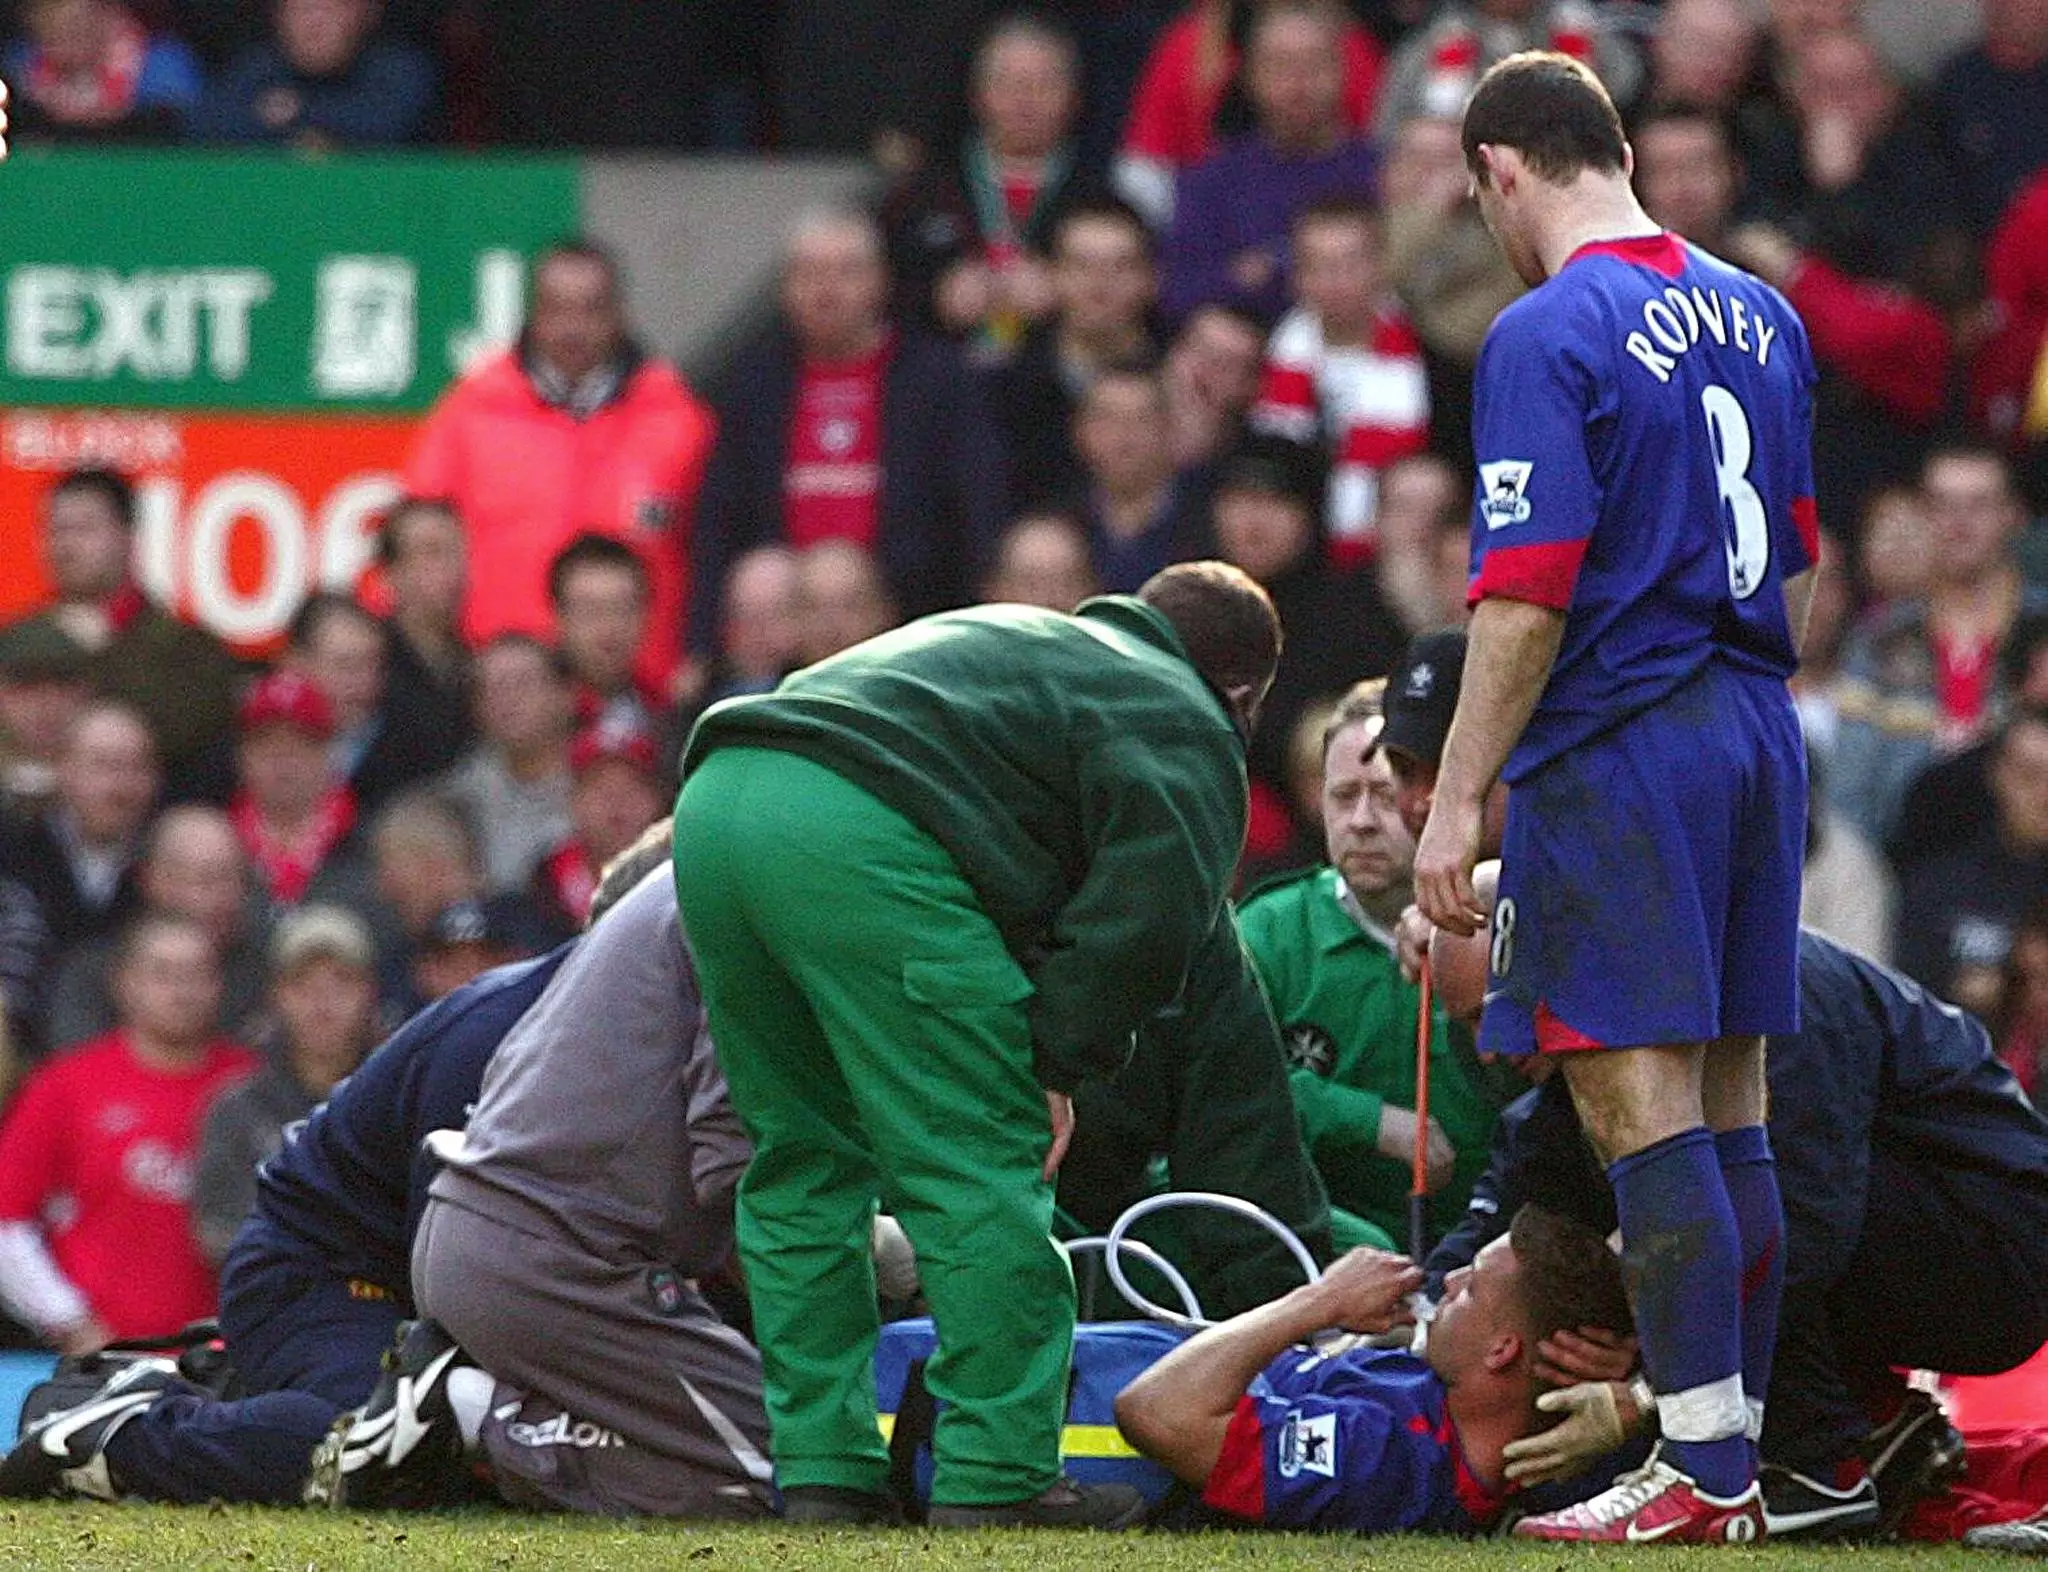 Medics see to Smith after the injury. Image: PA Images